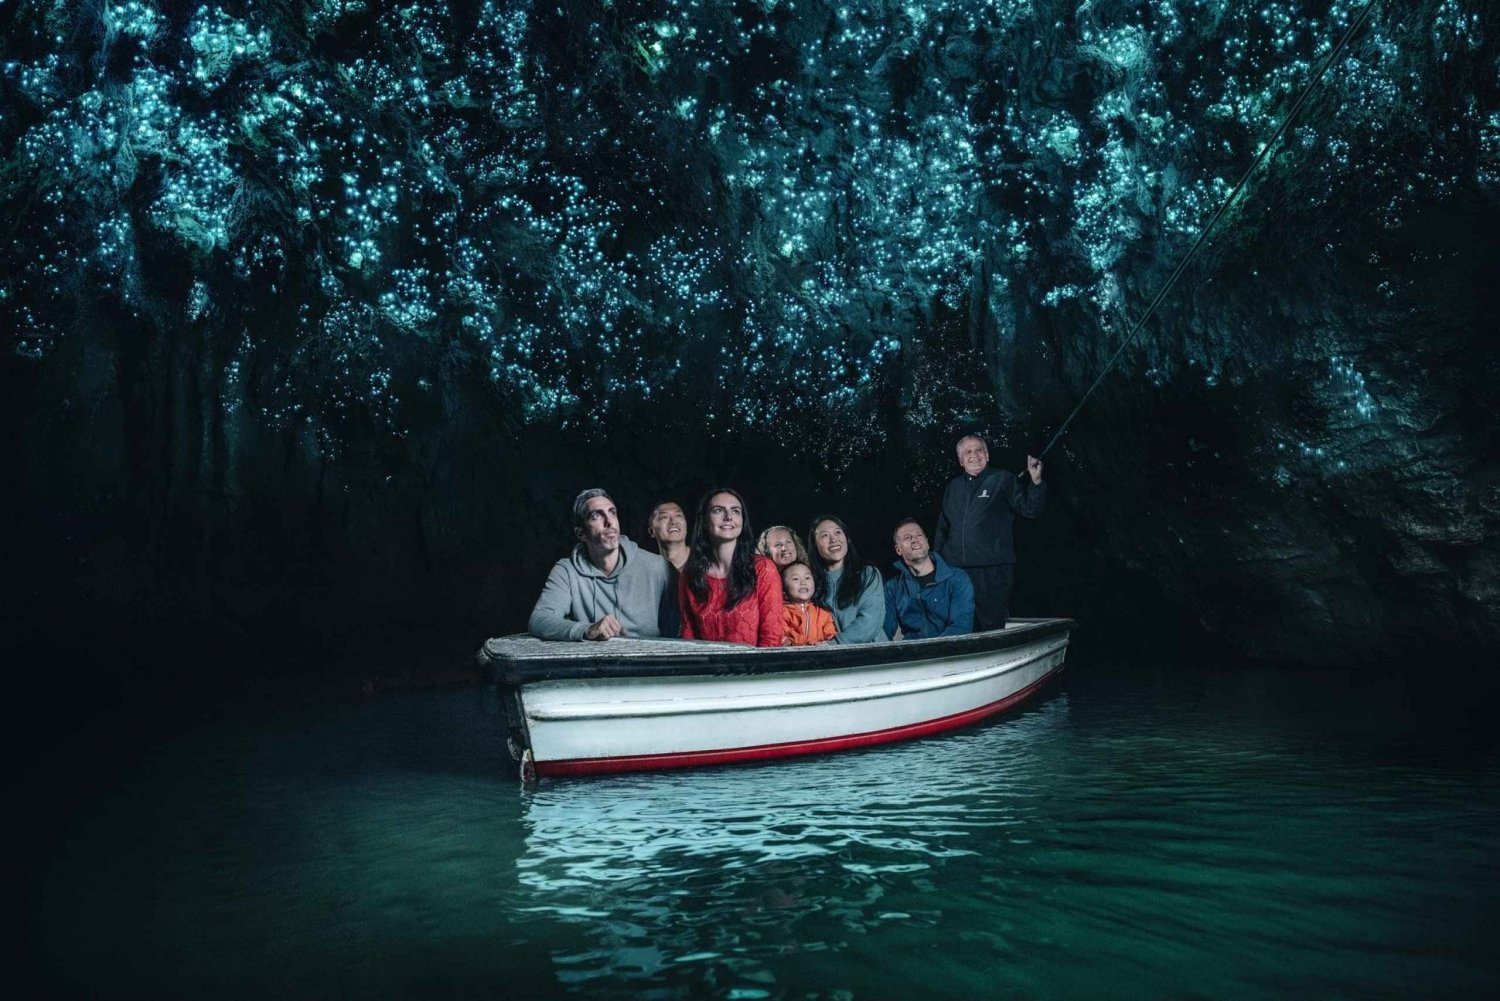 WAITOMO GLOWWORM CAVES TOUR FROM AUCKLAND